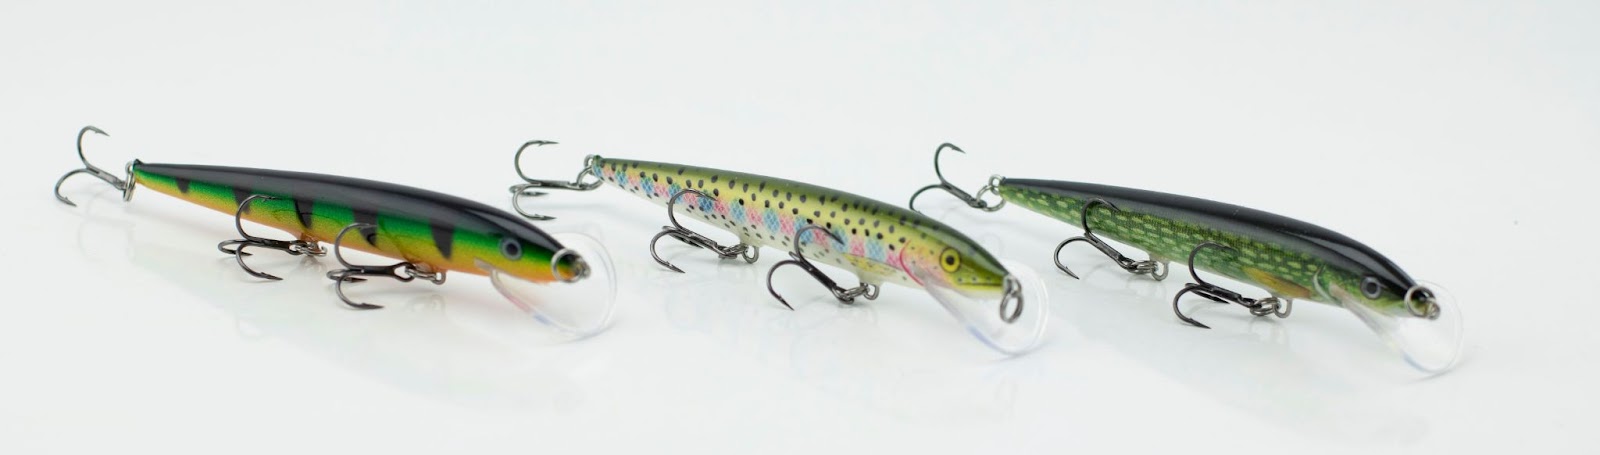 What Are the Best Lures for Walleyes? Top 5 Crankbaits for Targeting  Walleye Trolling - FishUSA